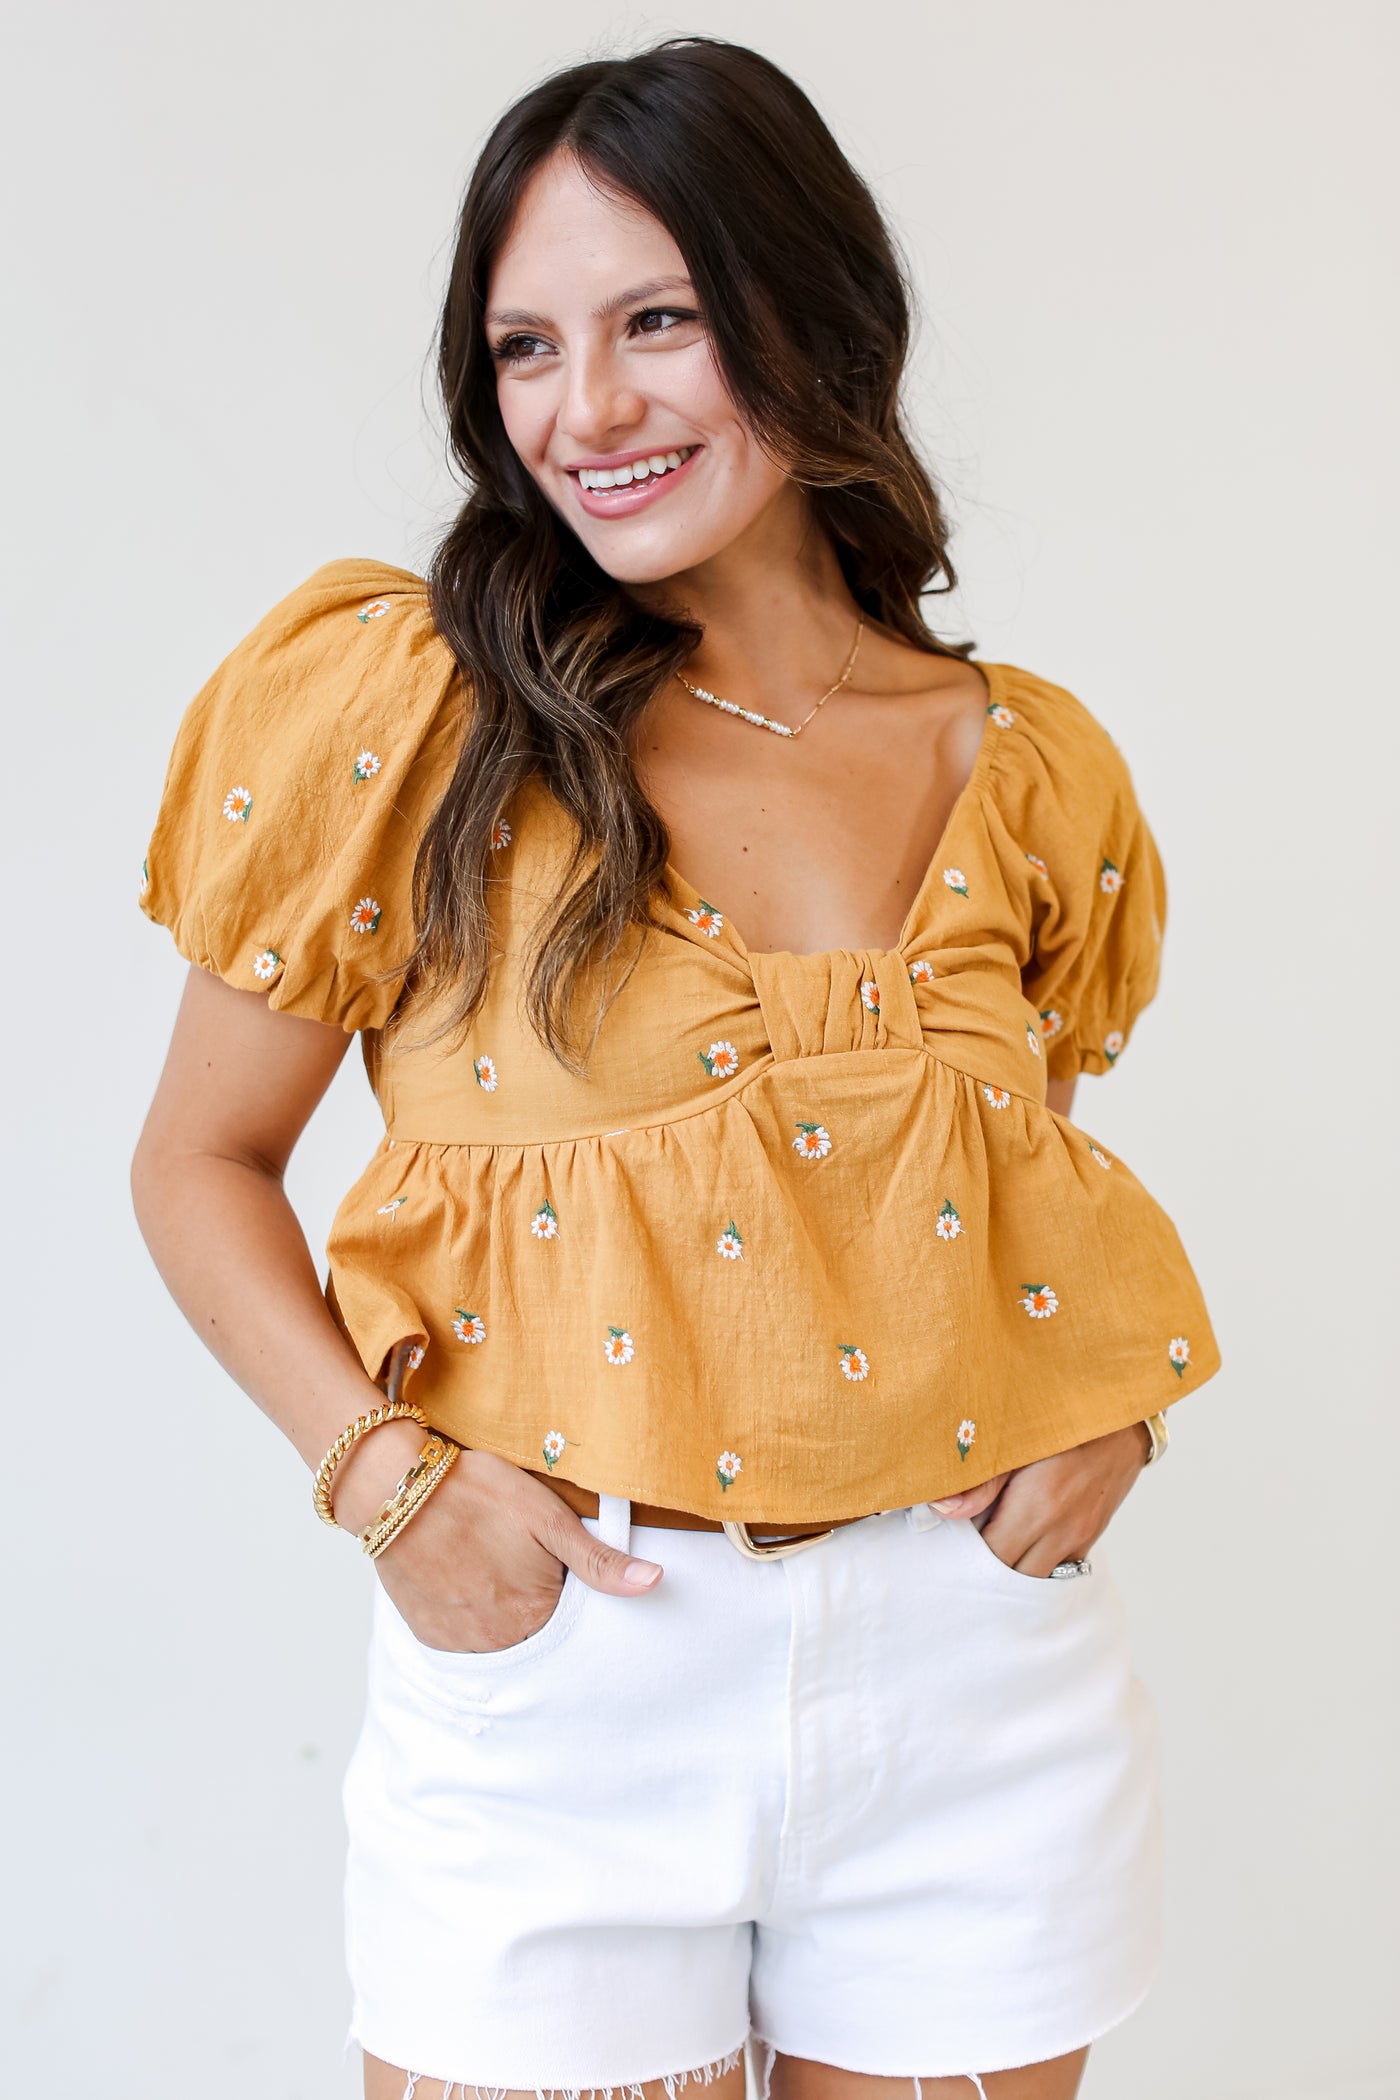 dress up model wearing a yellow Floral Cropped Blouse